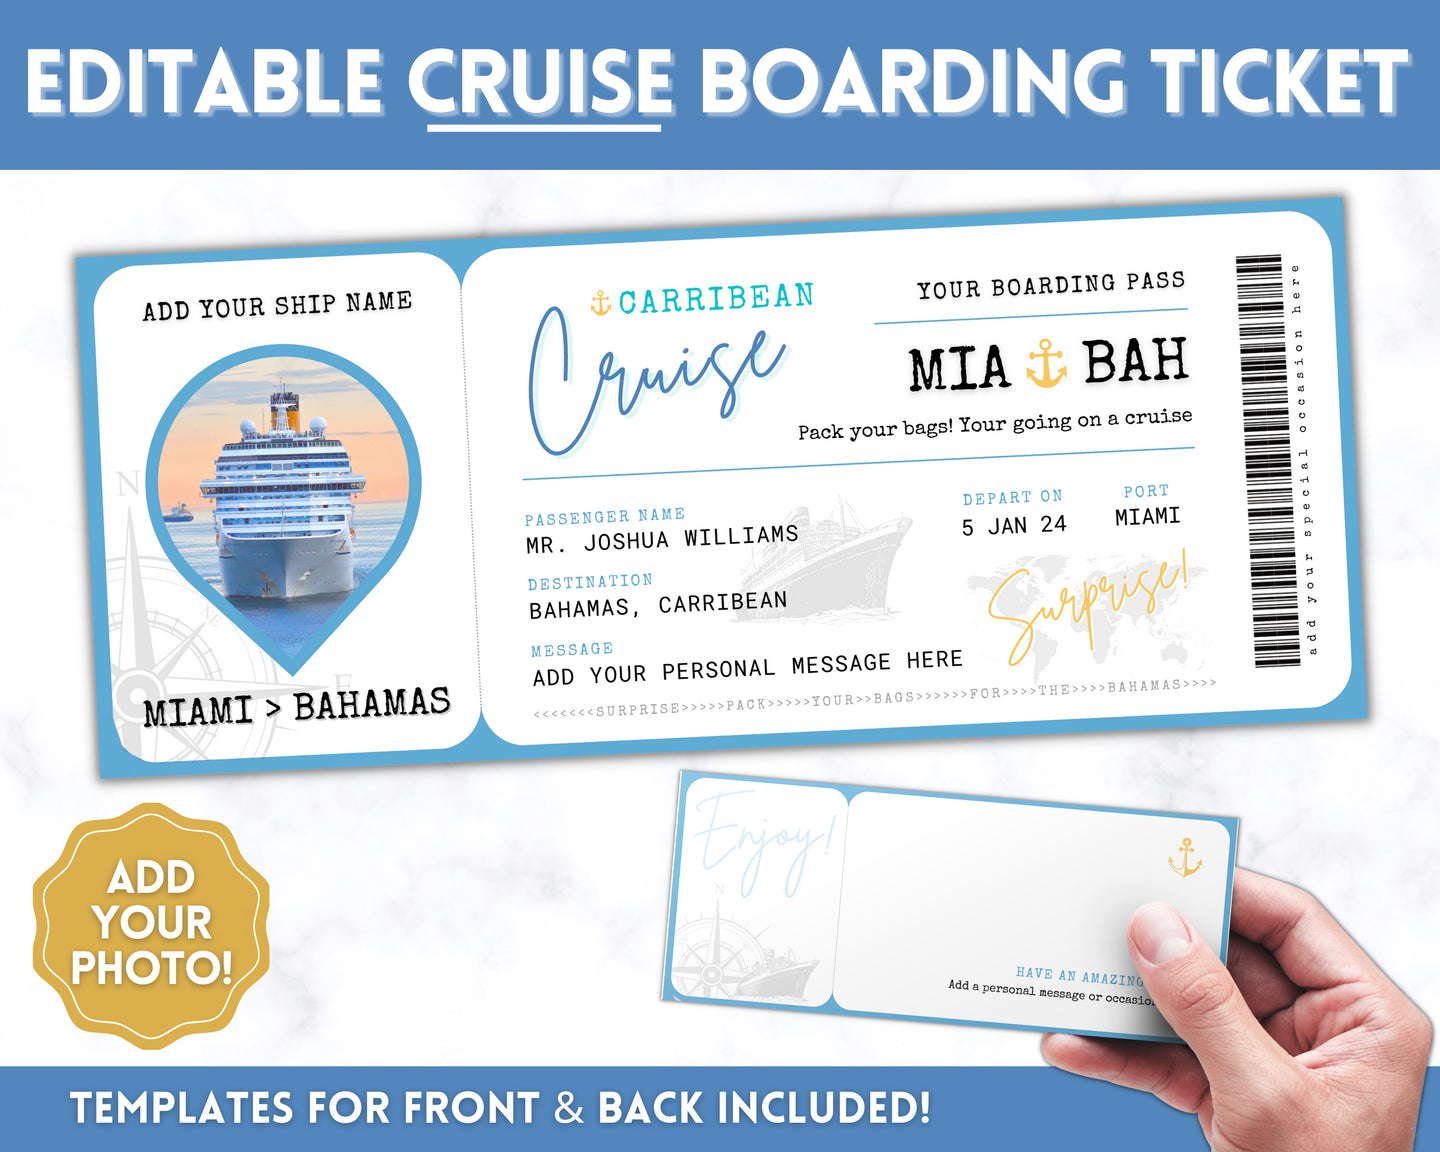 Cruise Ticket Template | Editable Boarding Pass Cruise Vacation Ticket for a Surprise Trip